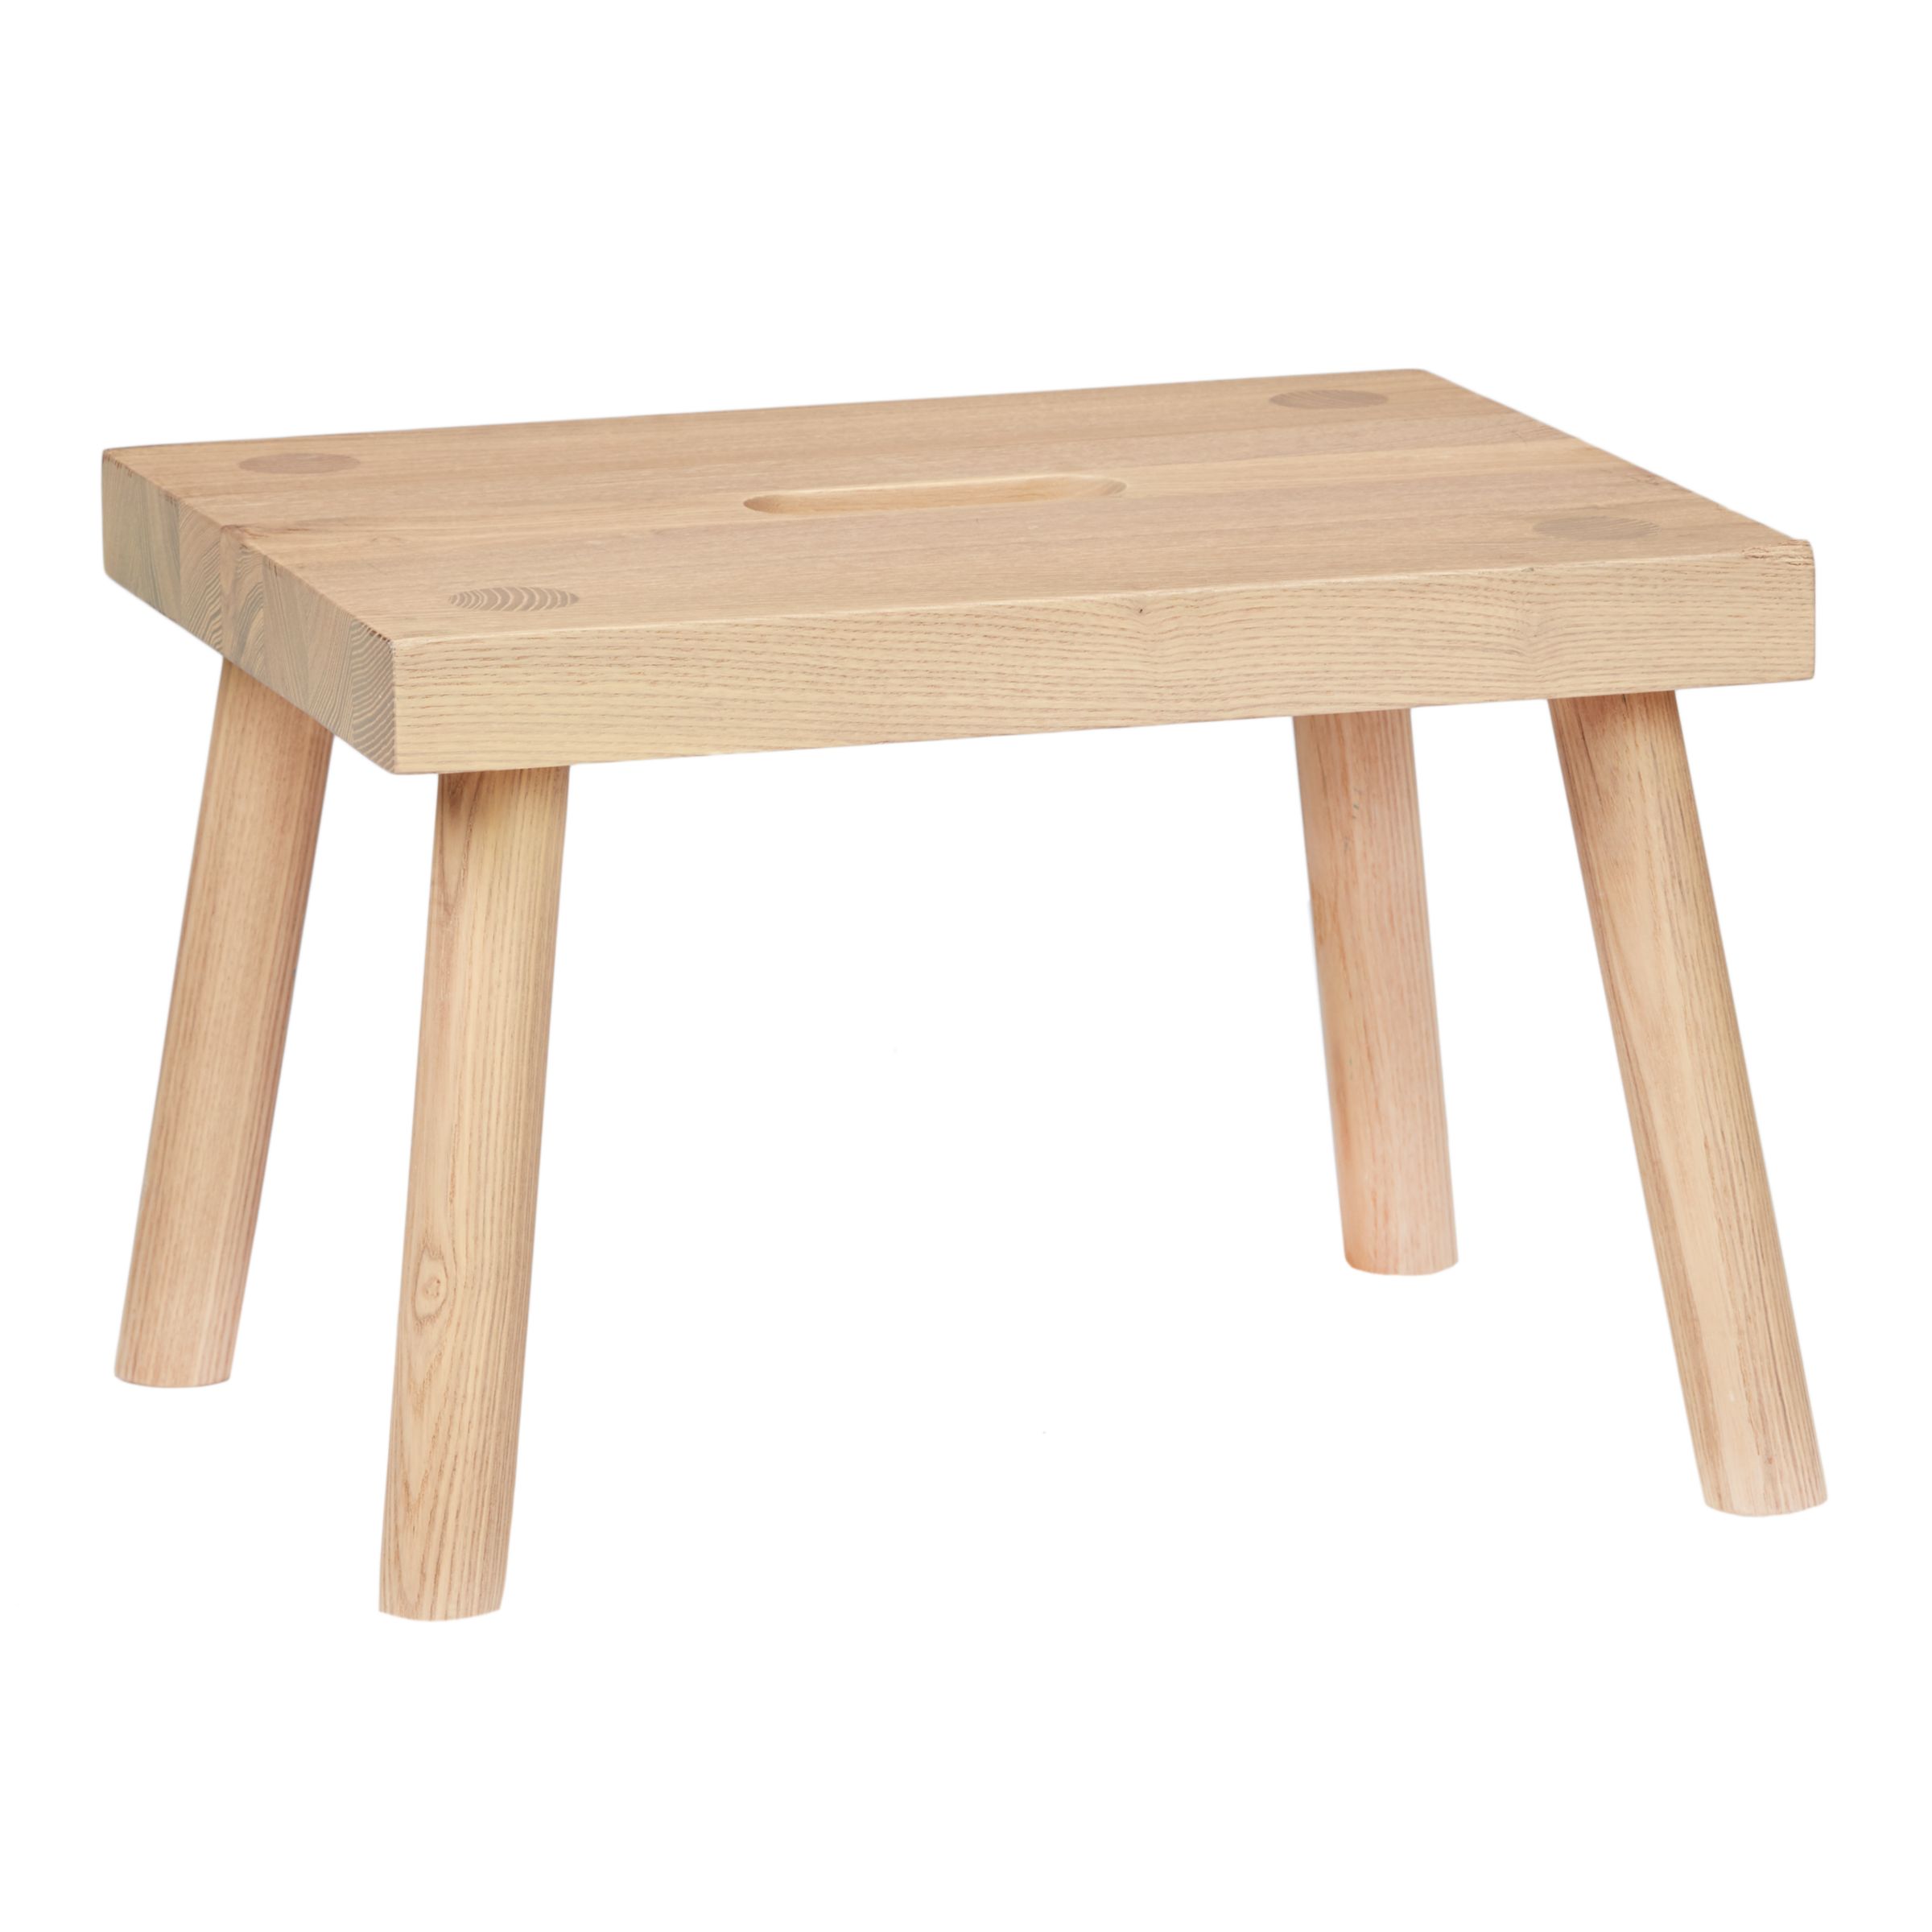 Design Project by John Lewis No.015 Ash Wood Step Stool, Natural